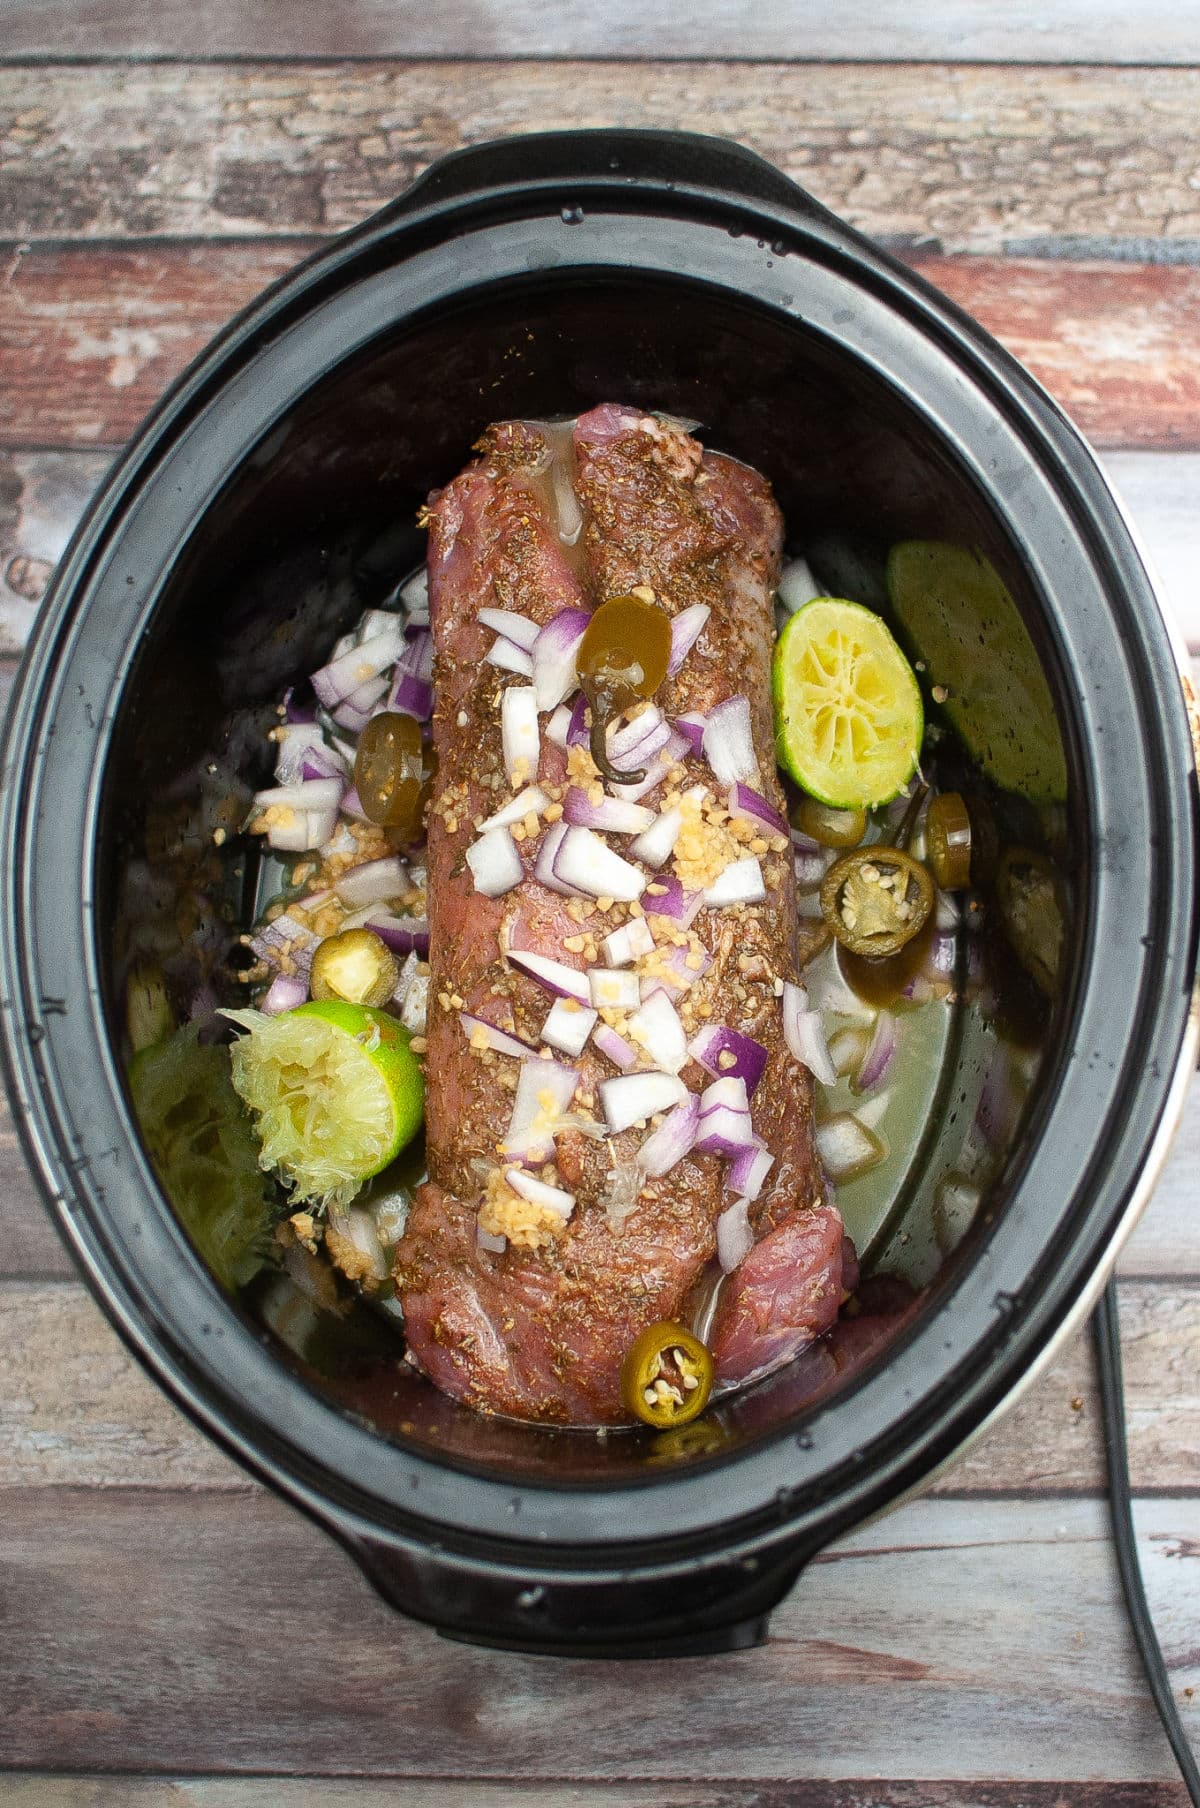 Uncooked pork tenderloin with onions, jalapeños, spices and limes in juices in slow cooker.